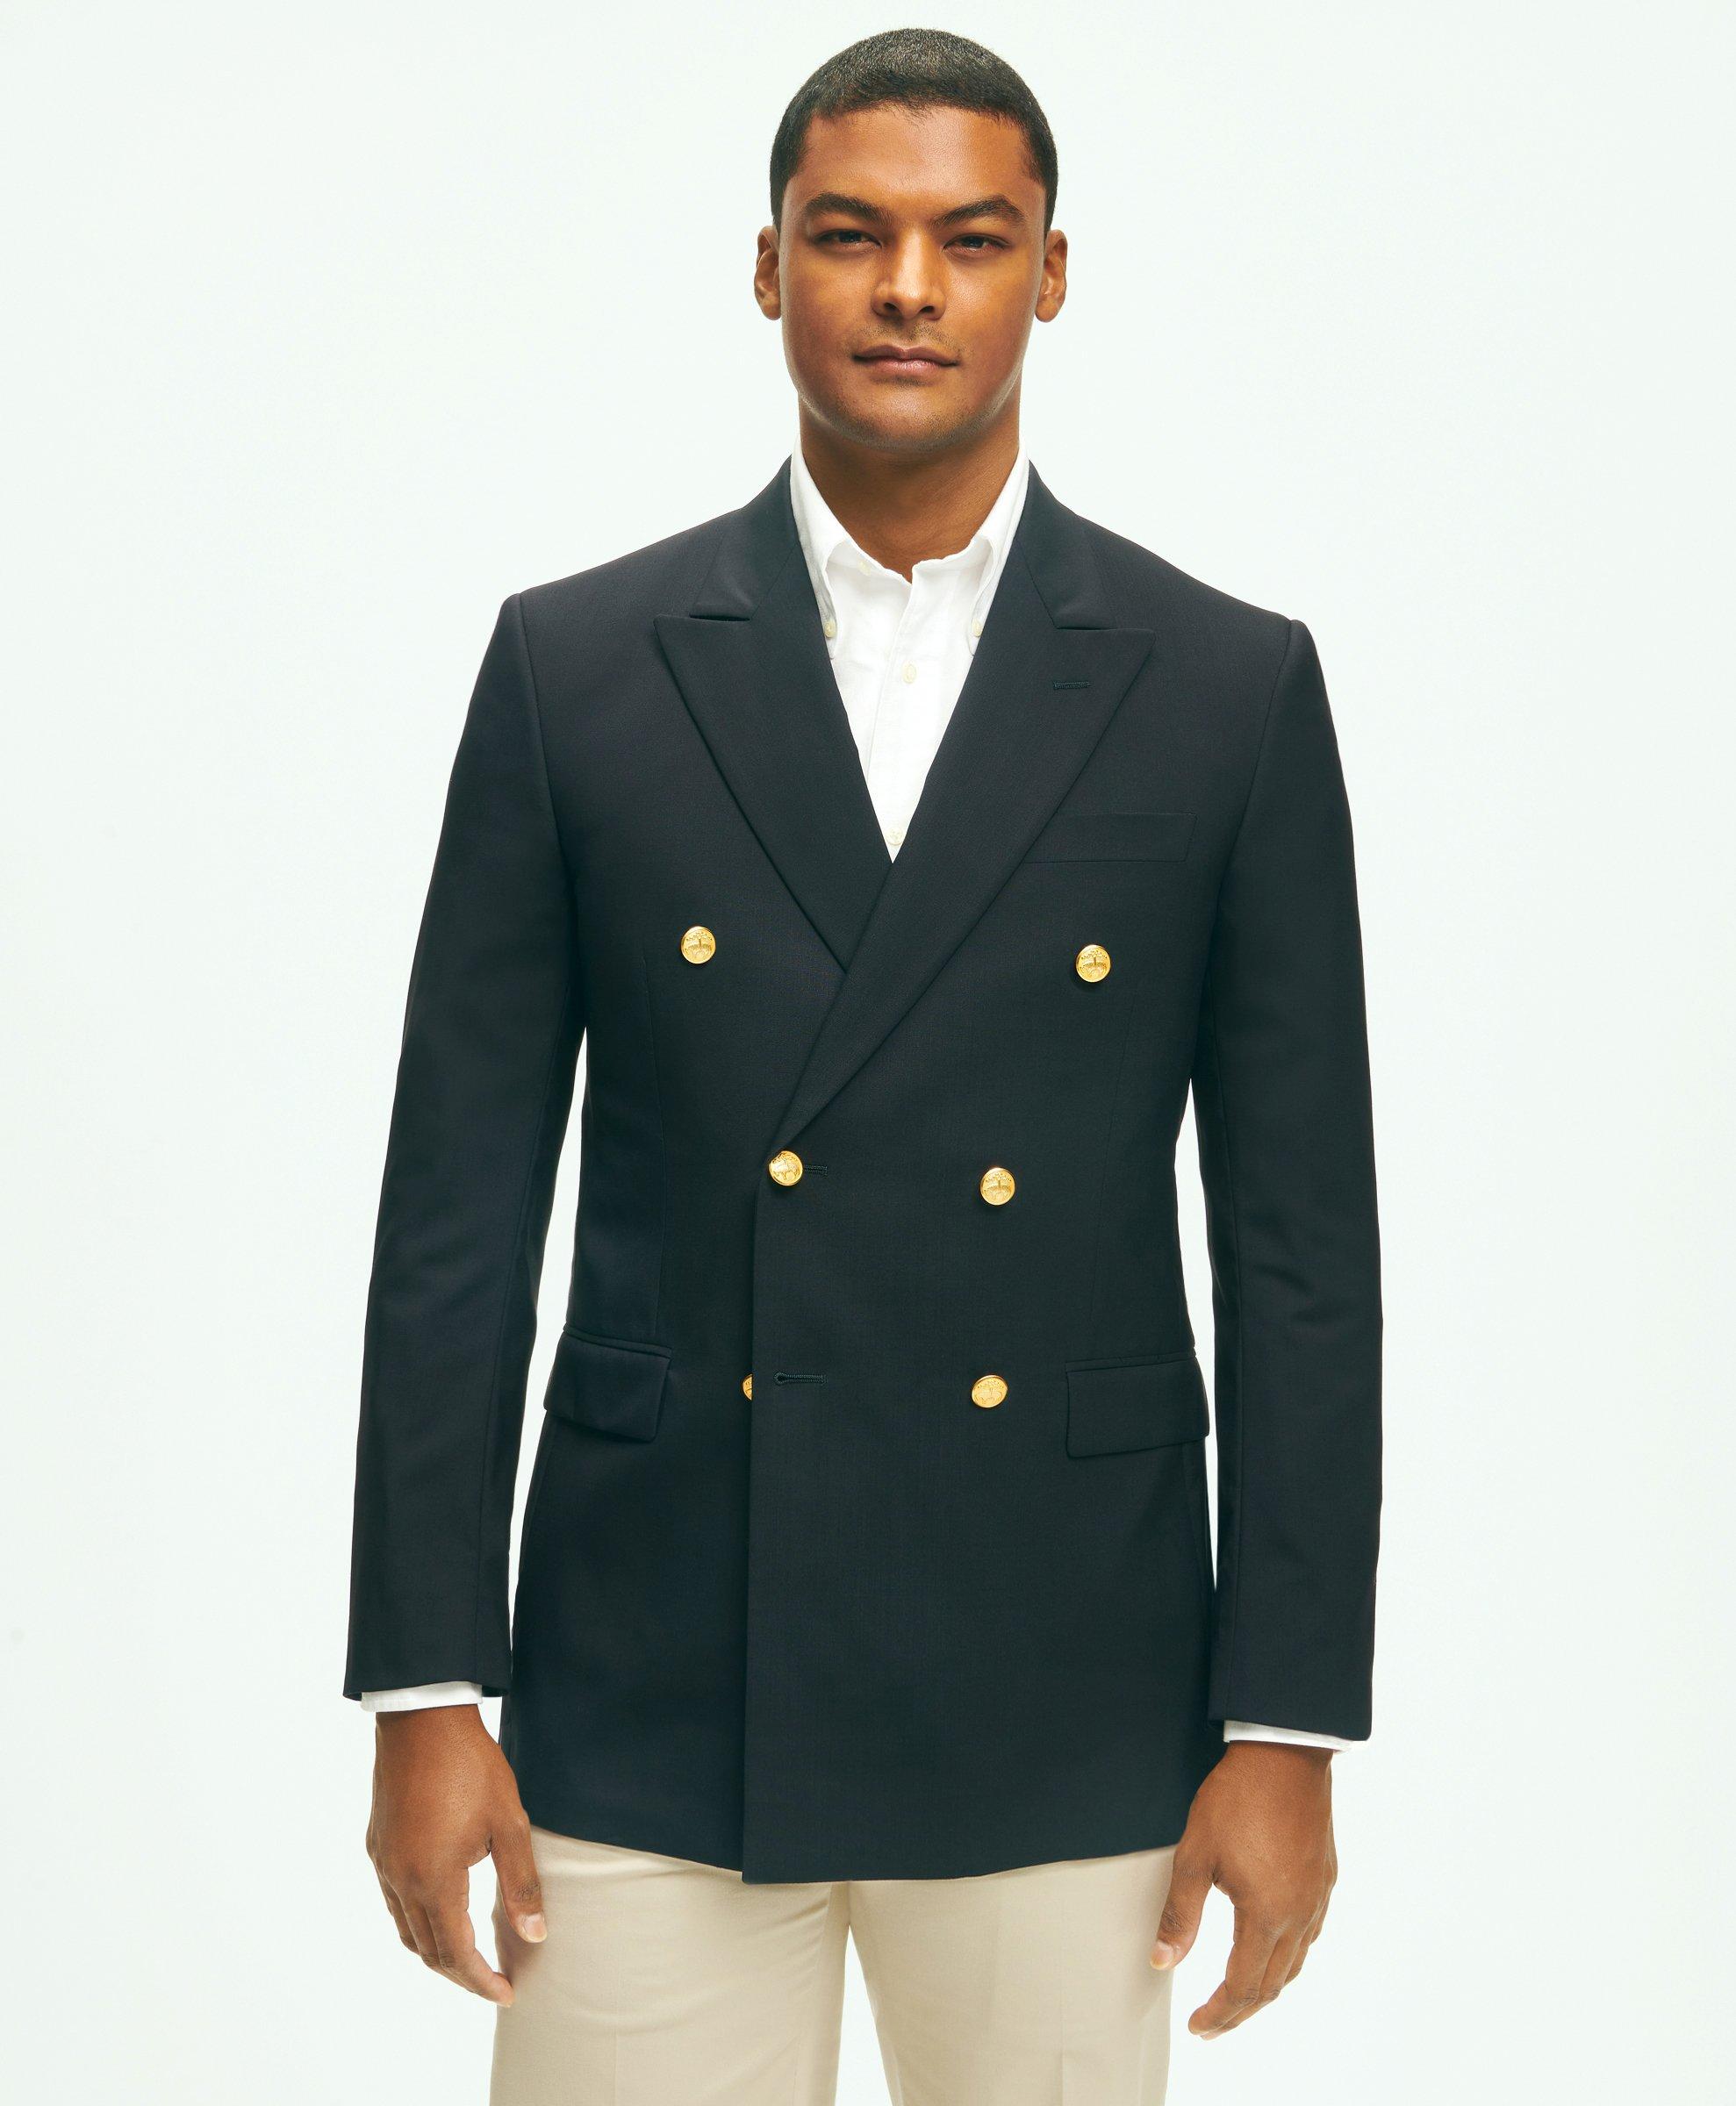 Double Breasted Classic Black Blazer Slim Fit Jacket With Gold Buttons